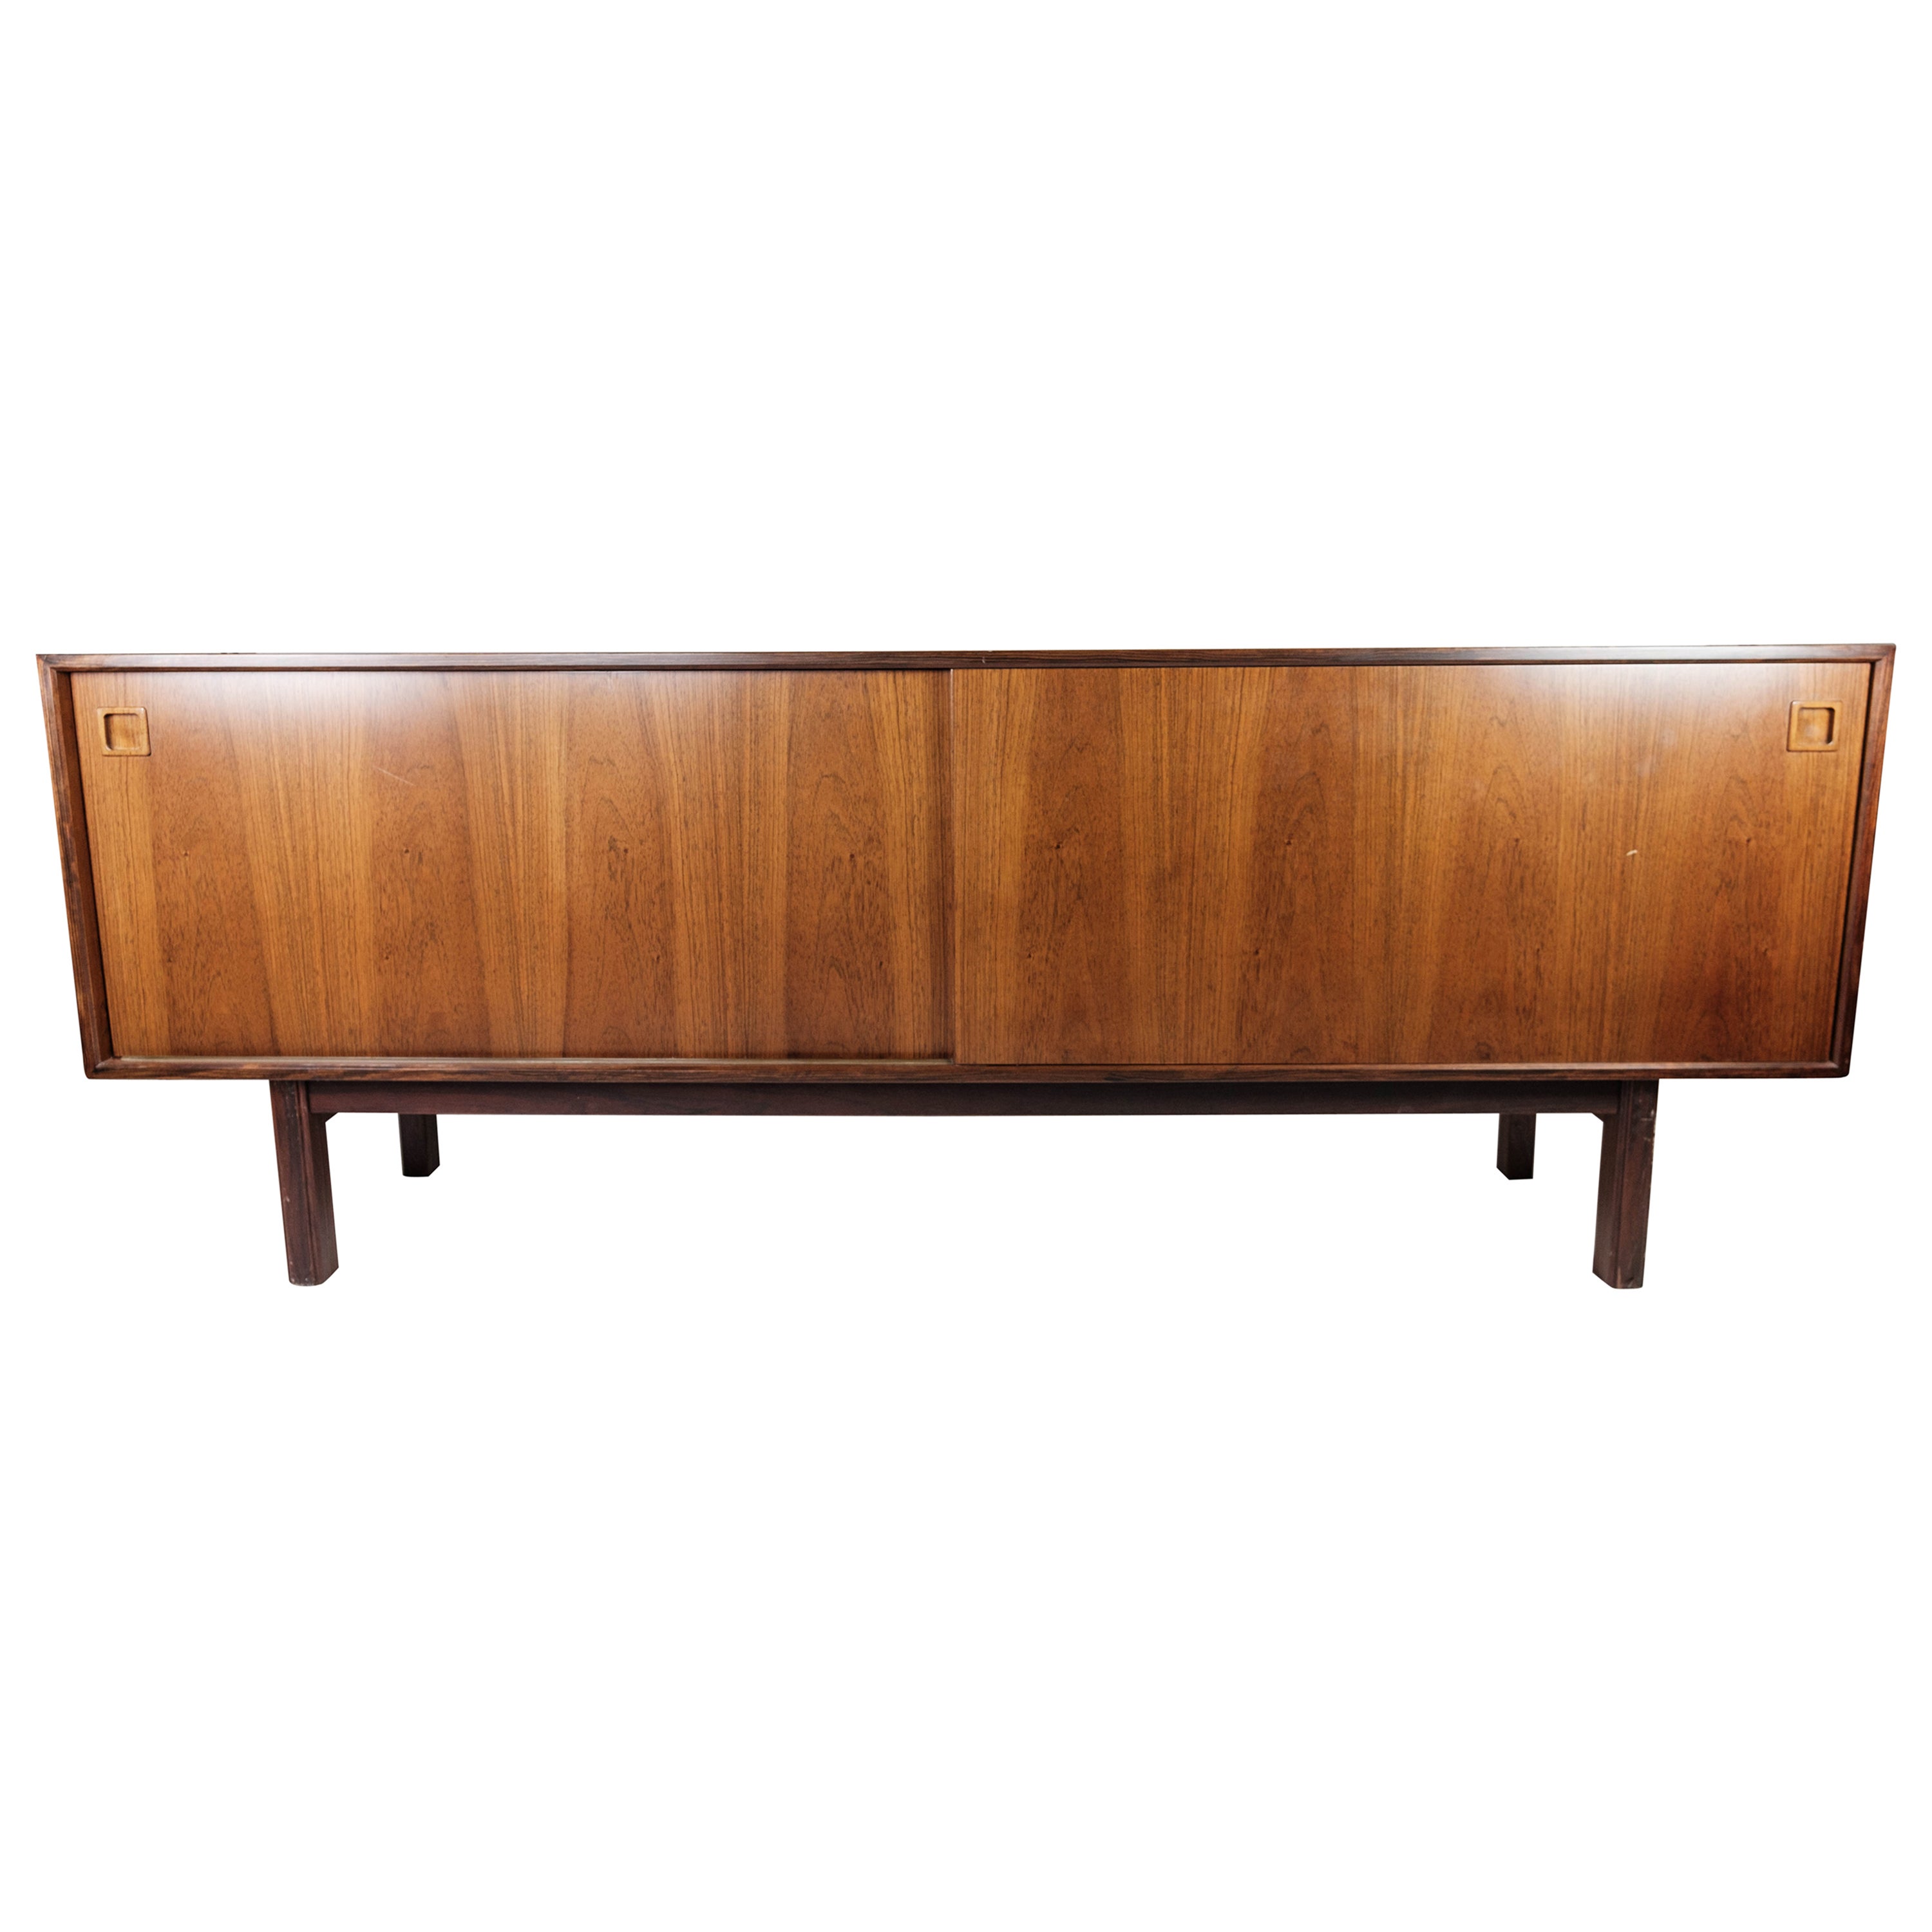 Sideboard in Rosewood with Sliding Doors Designed by Omann Junior from the 1960s